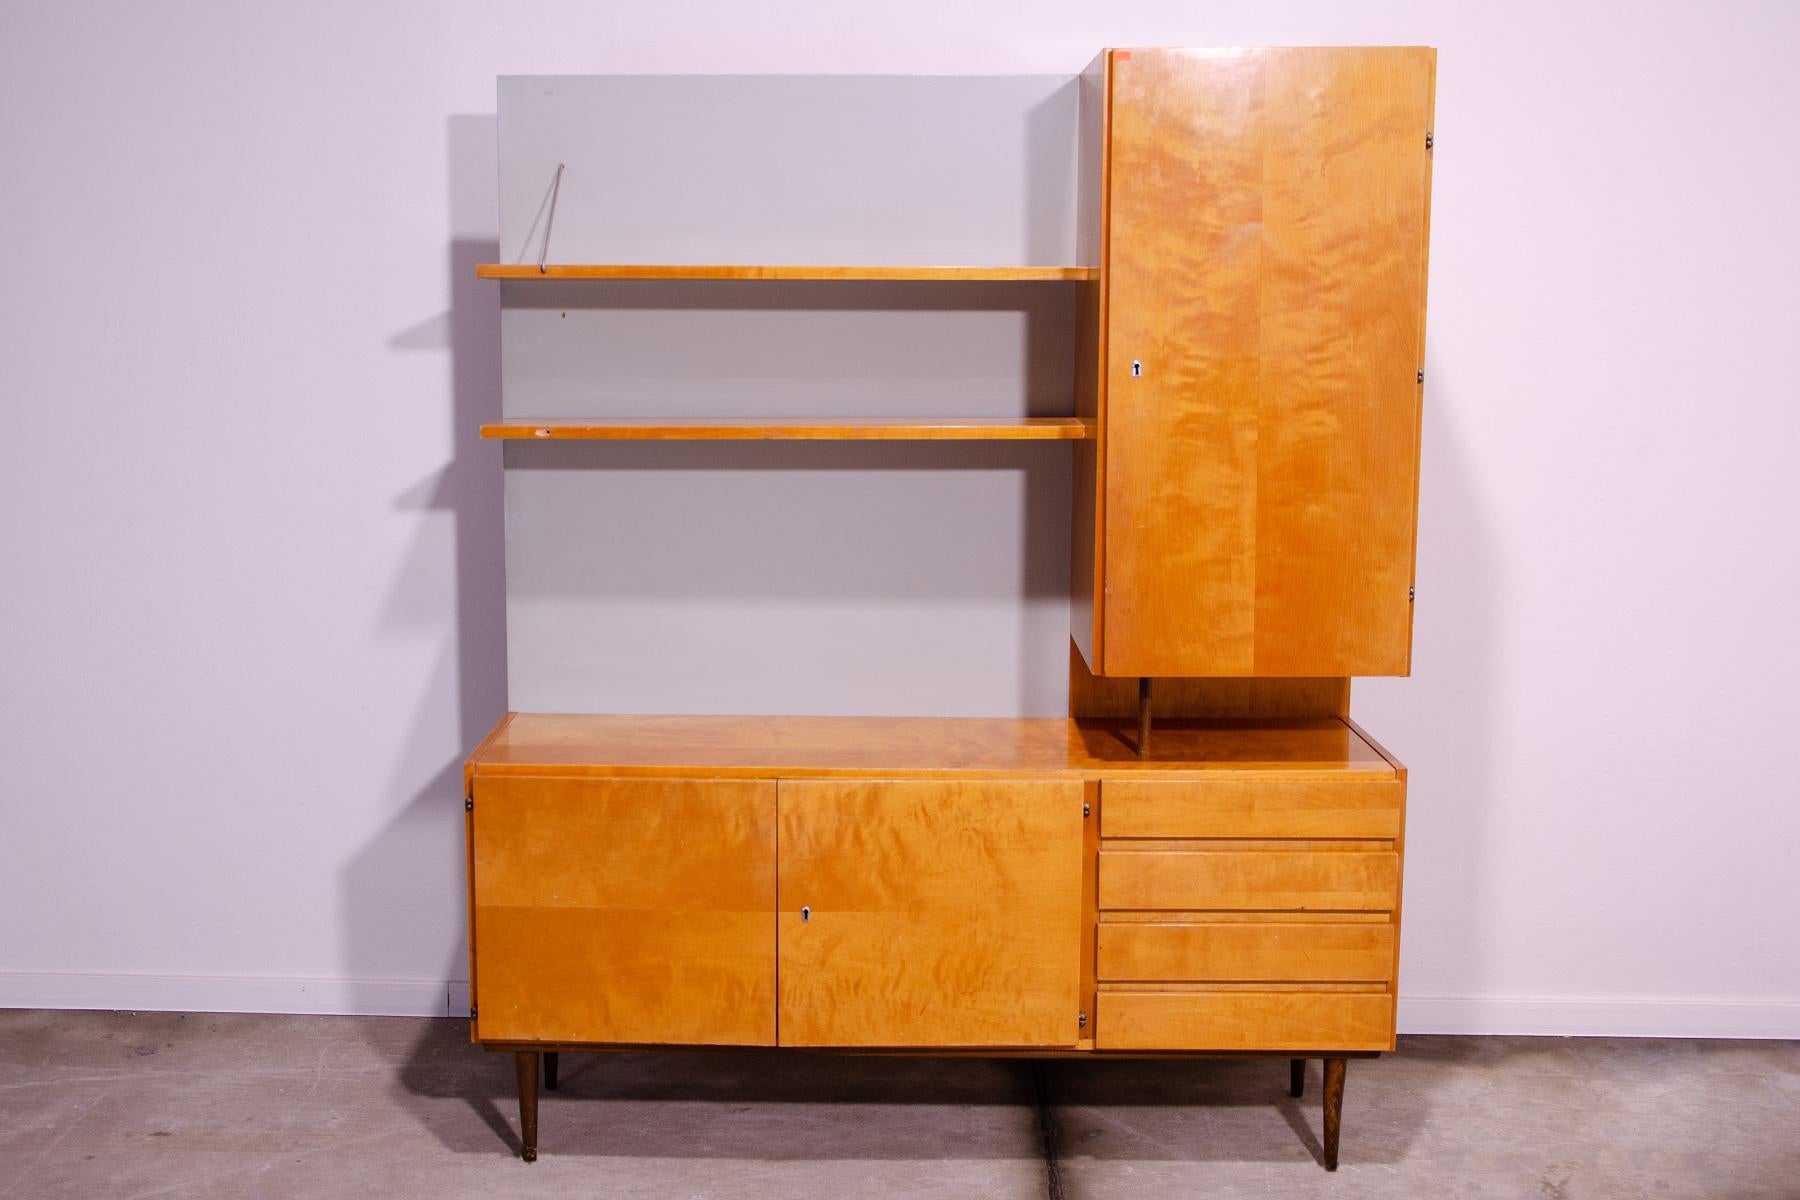 Mid century wall shelf cabinet from the 1960´s. It was by UP Závody in the former Czechoslovakia.
It can also be used as a chest of drawers or a bookcase.
It´s made of beechwood, ashwood and plywood.
In good preserved condition, it shows signs of